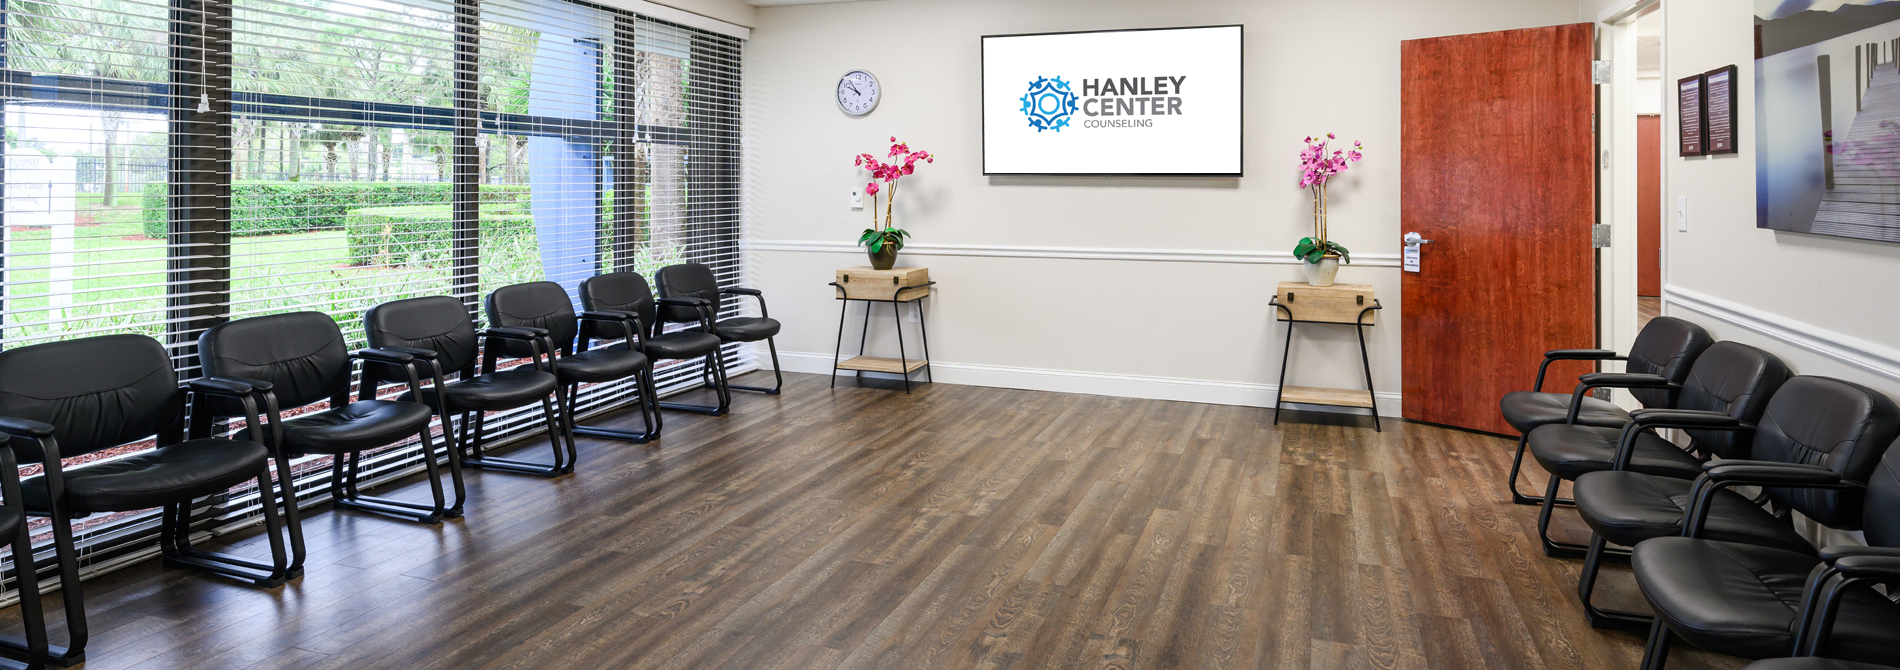 Hanley Center Counseling group room.